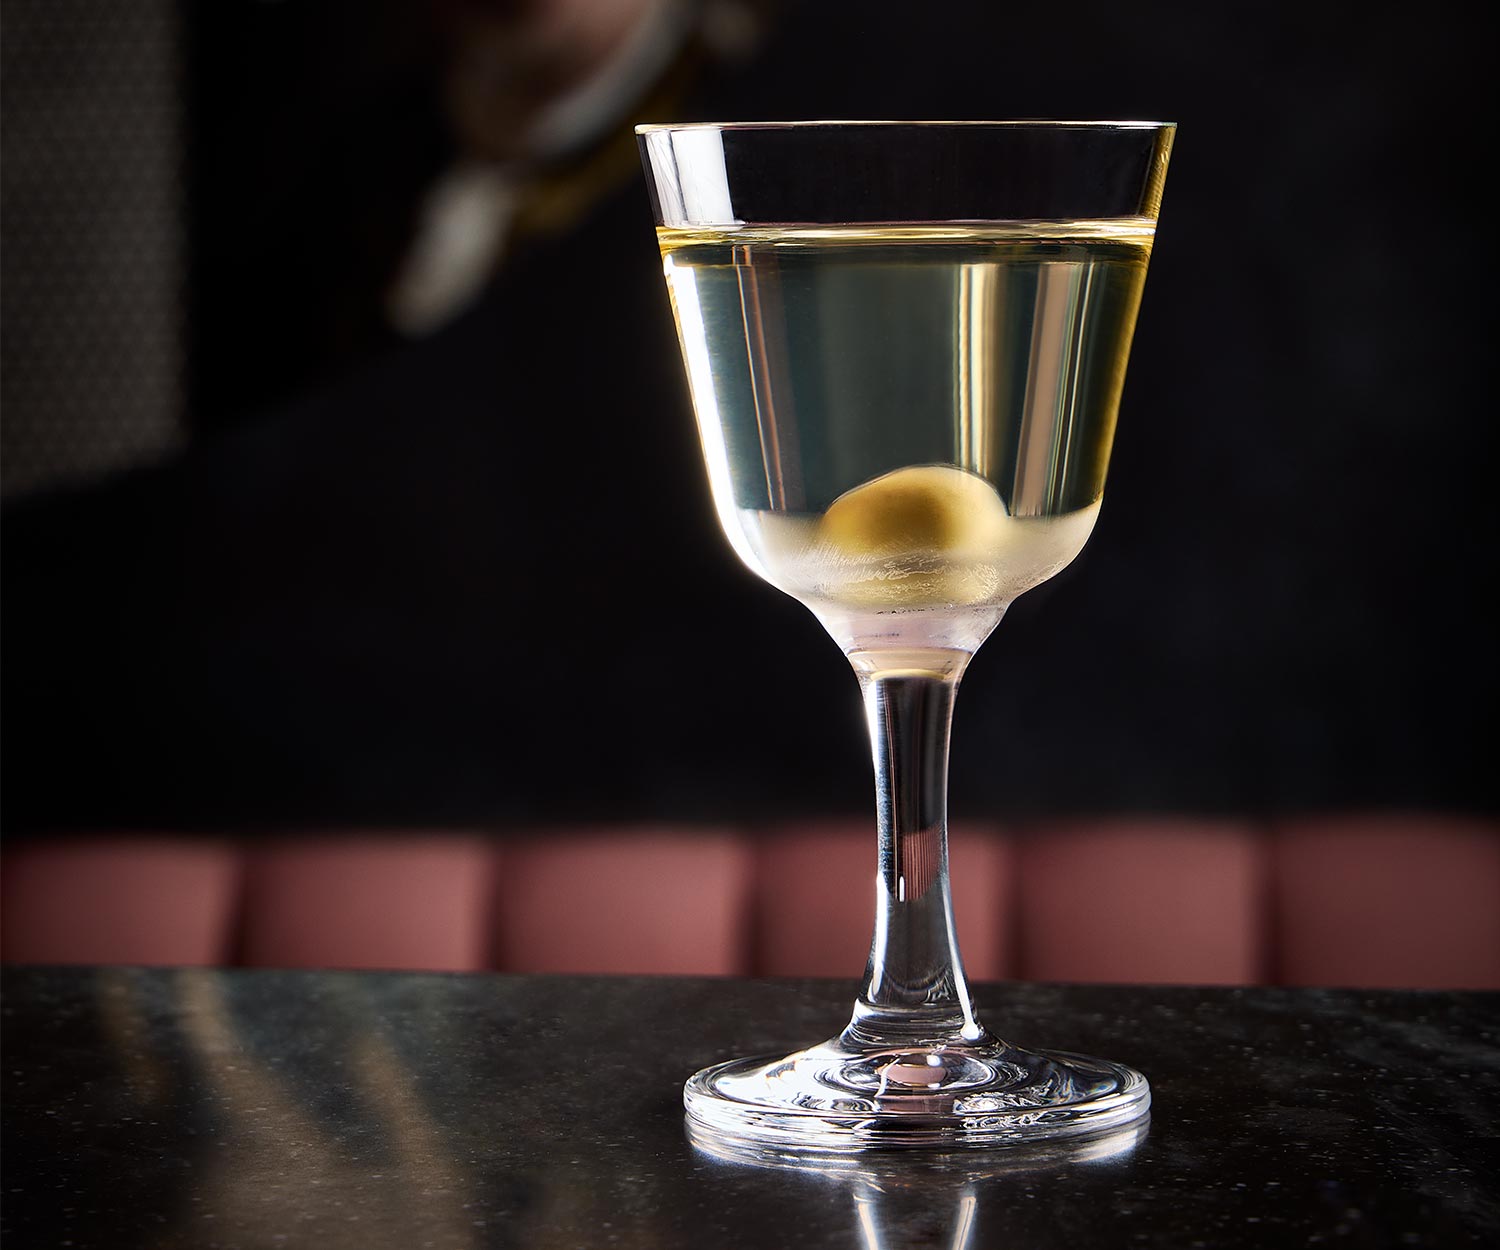 Inverted Dirty Martini from Pigtail by José Andrés